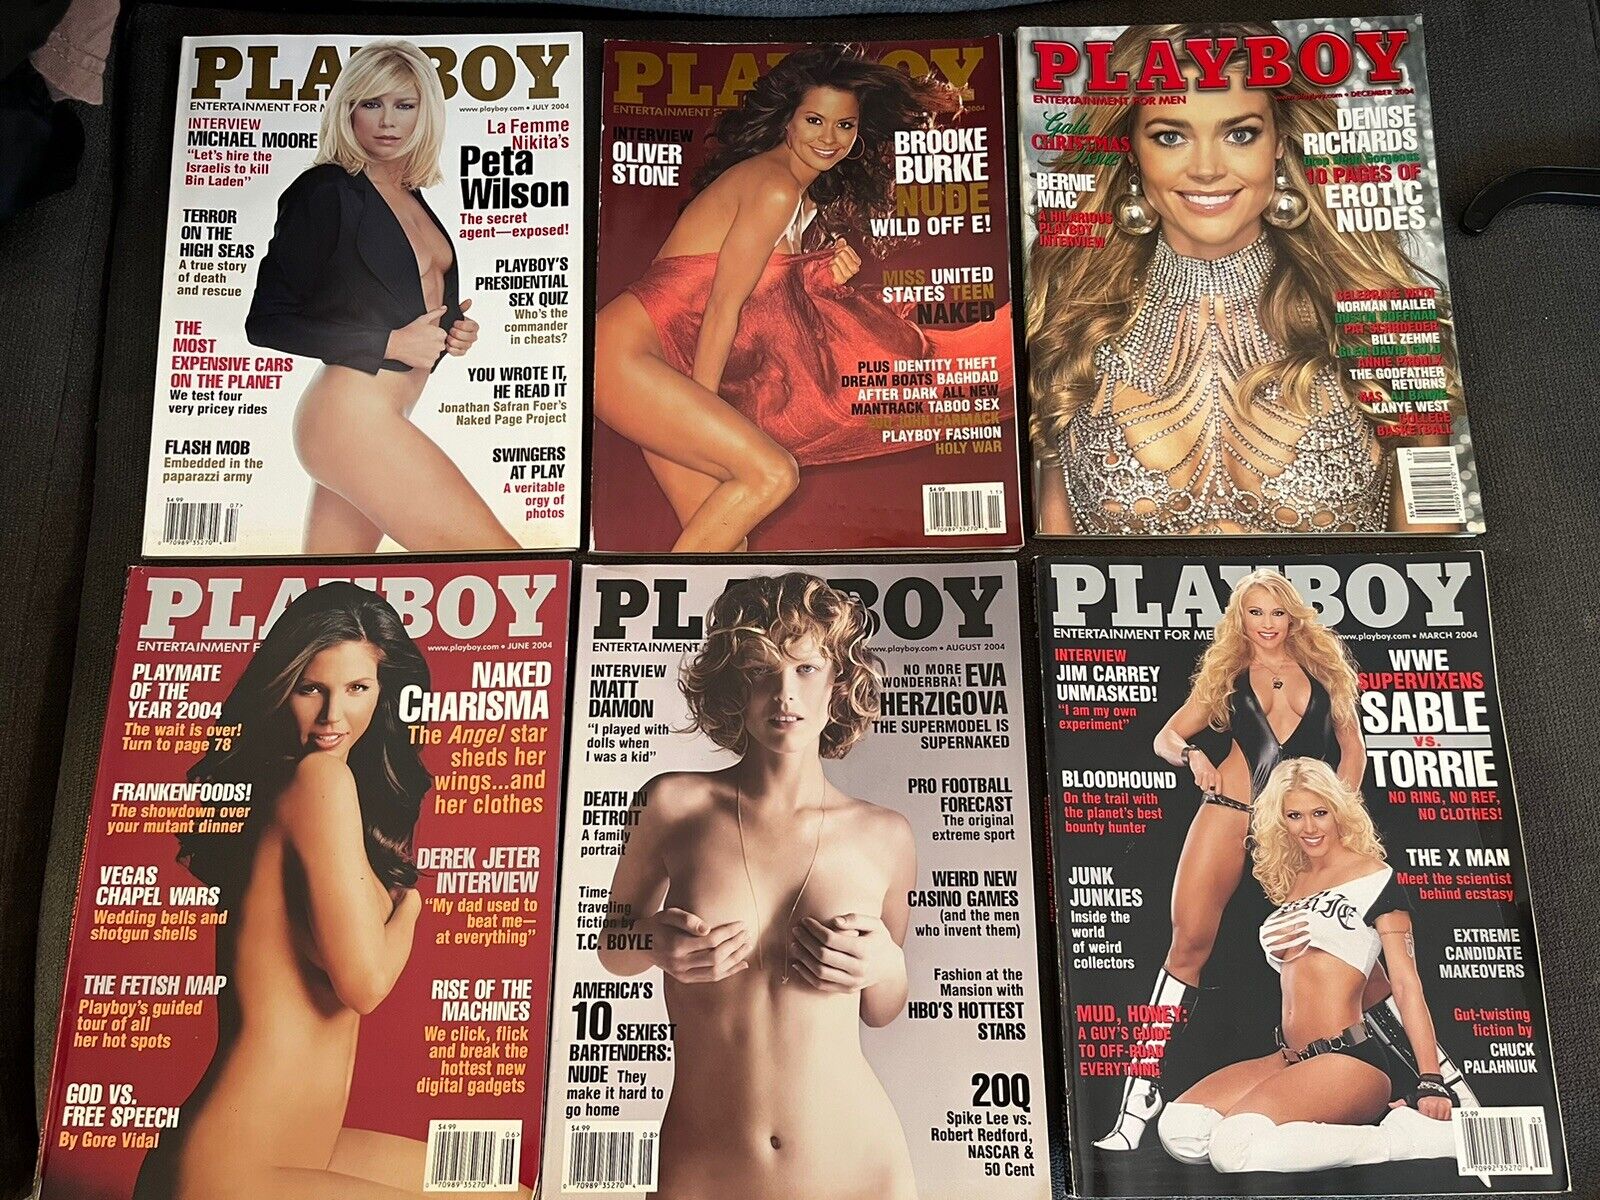 Lot Of 6 2004 Playboy Magazines, March, June-Aug, Nov/Dec, Rare Vintage Issues